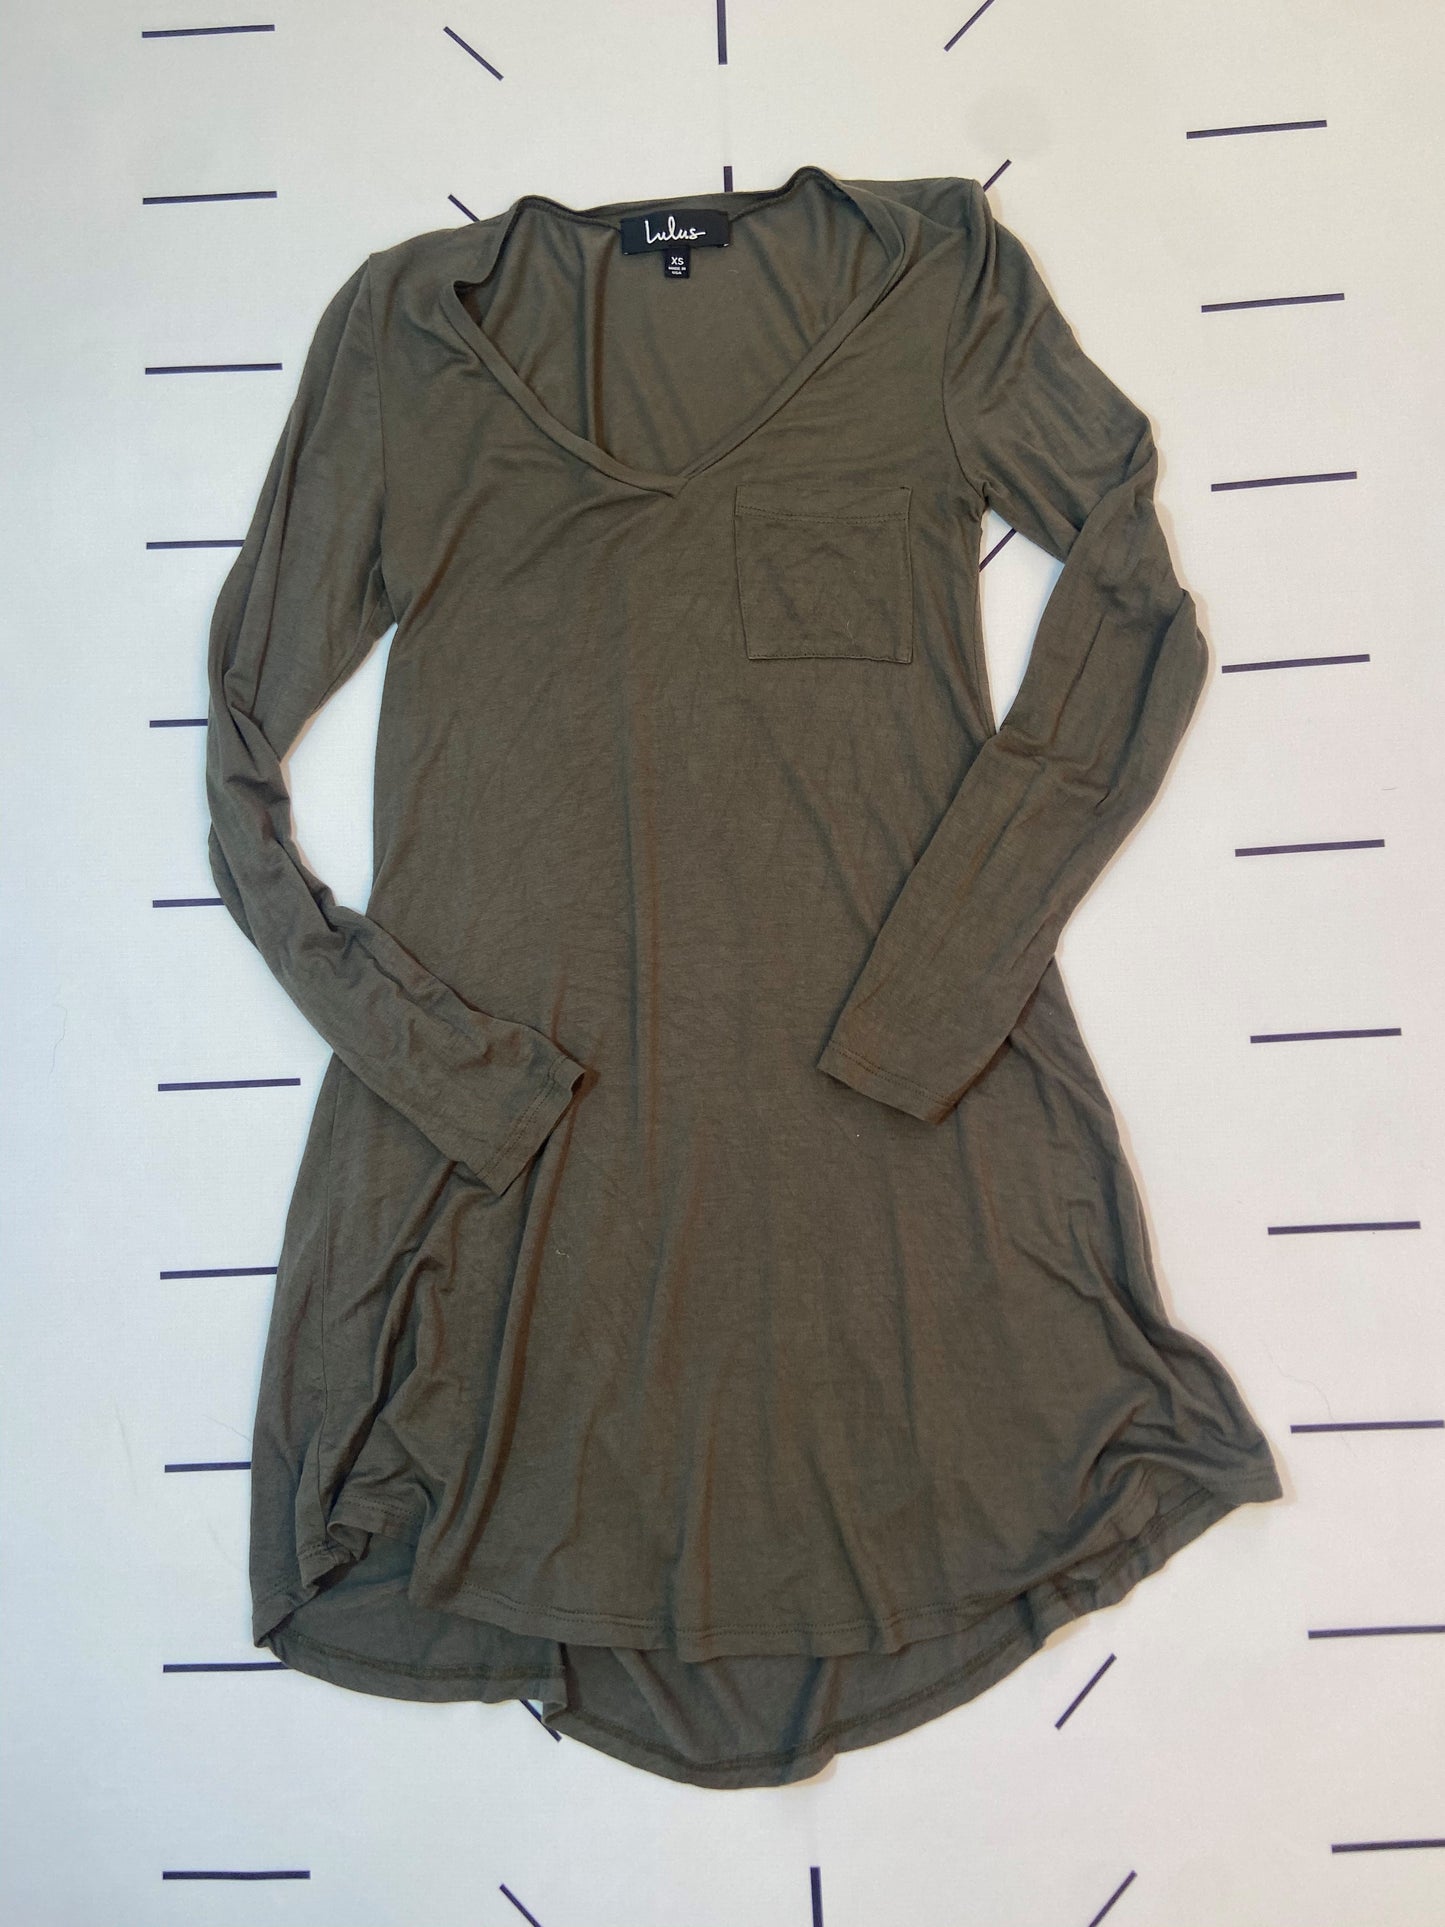 Green Long Sleeve V-neck Tunic Style Top/Dress with Front Pocket - XS